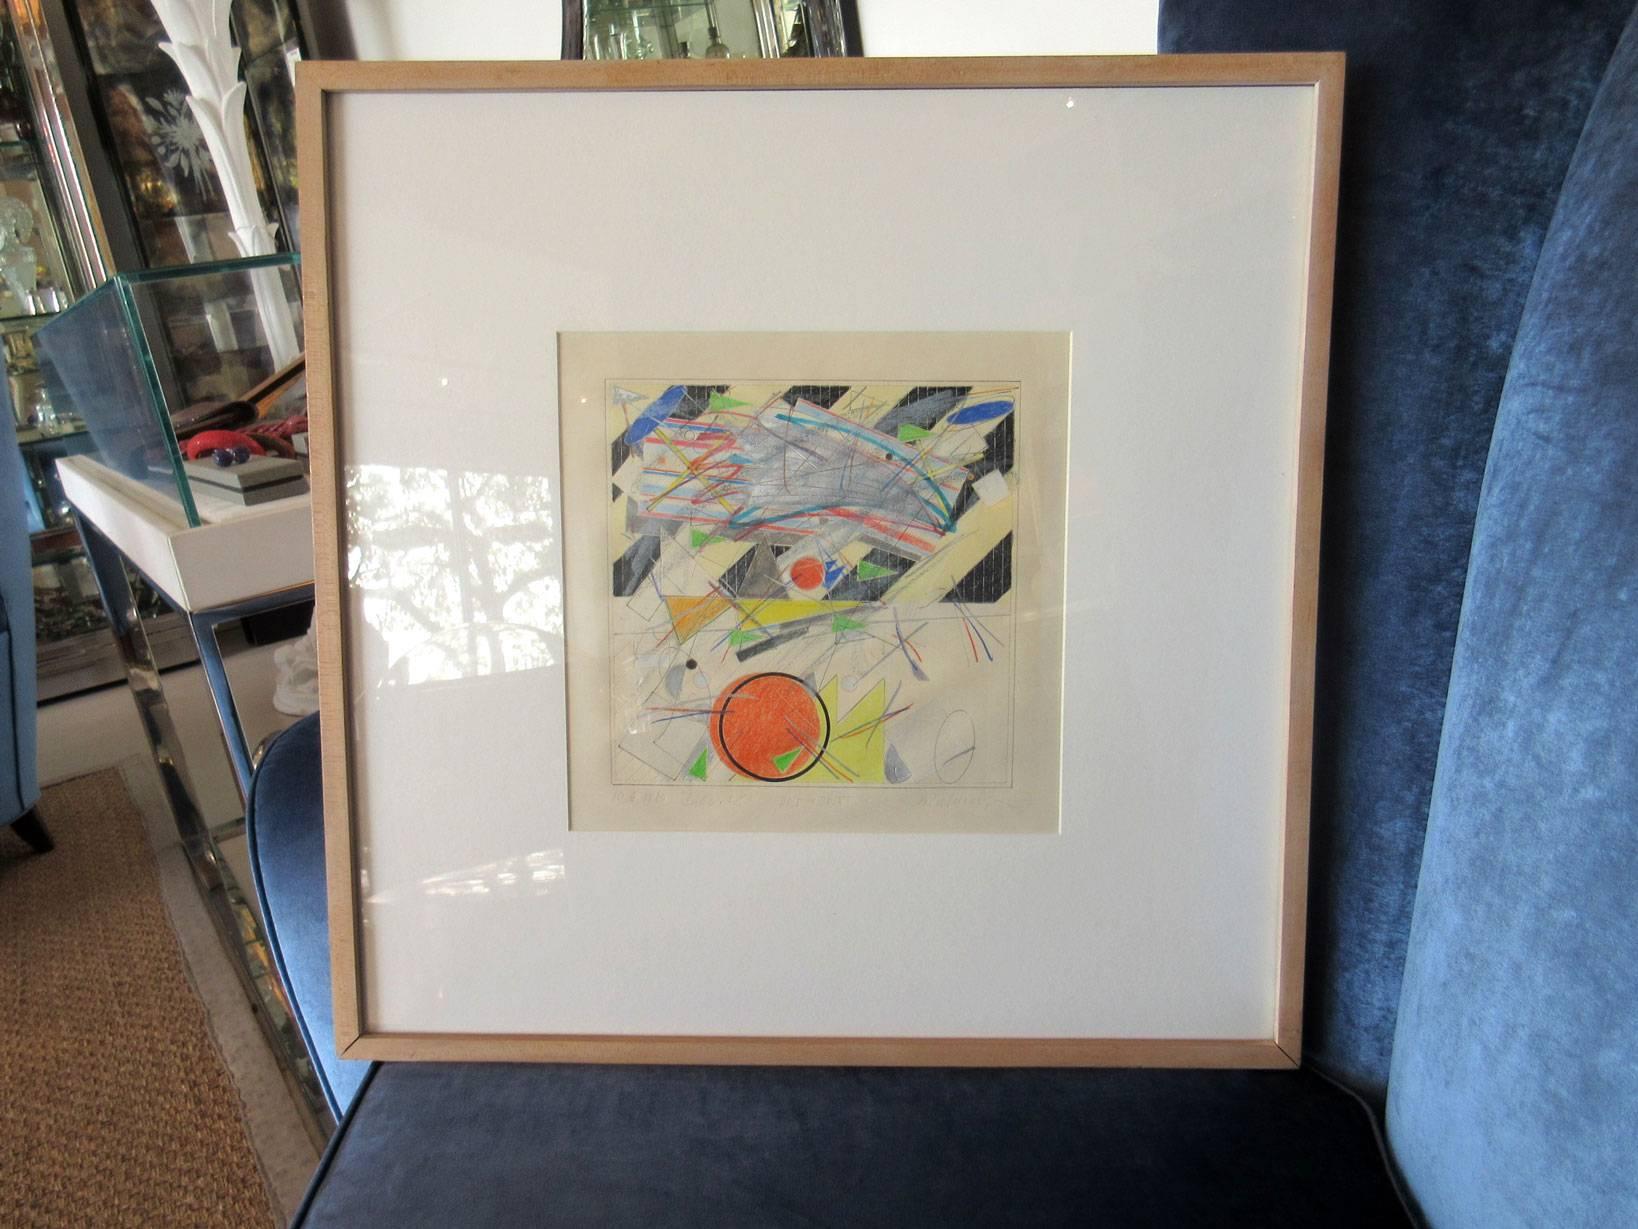 Mixed-media non-objective abstract by listed artist Vladimir Zakrzewski. The drawing is entitled 